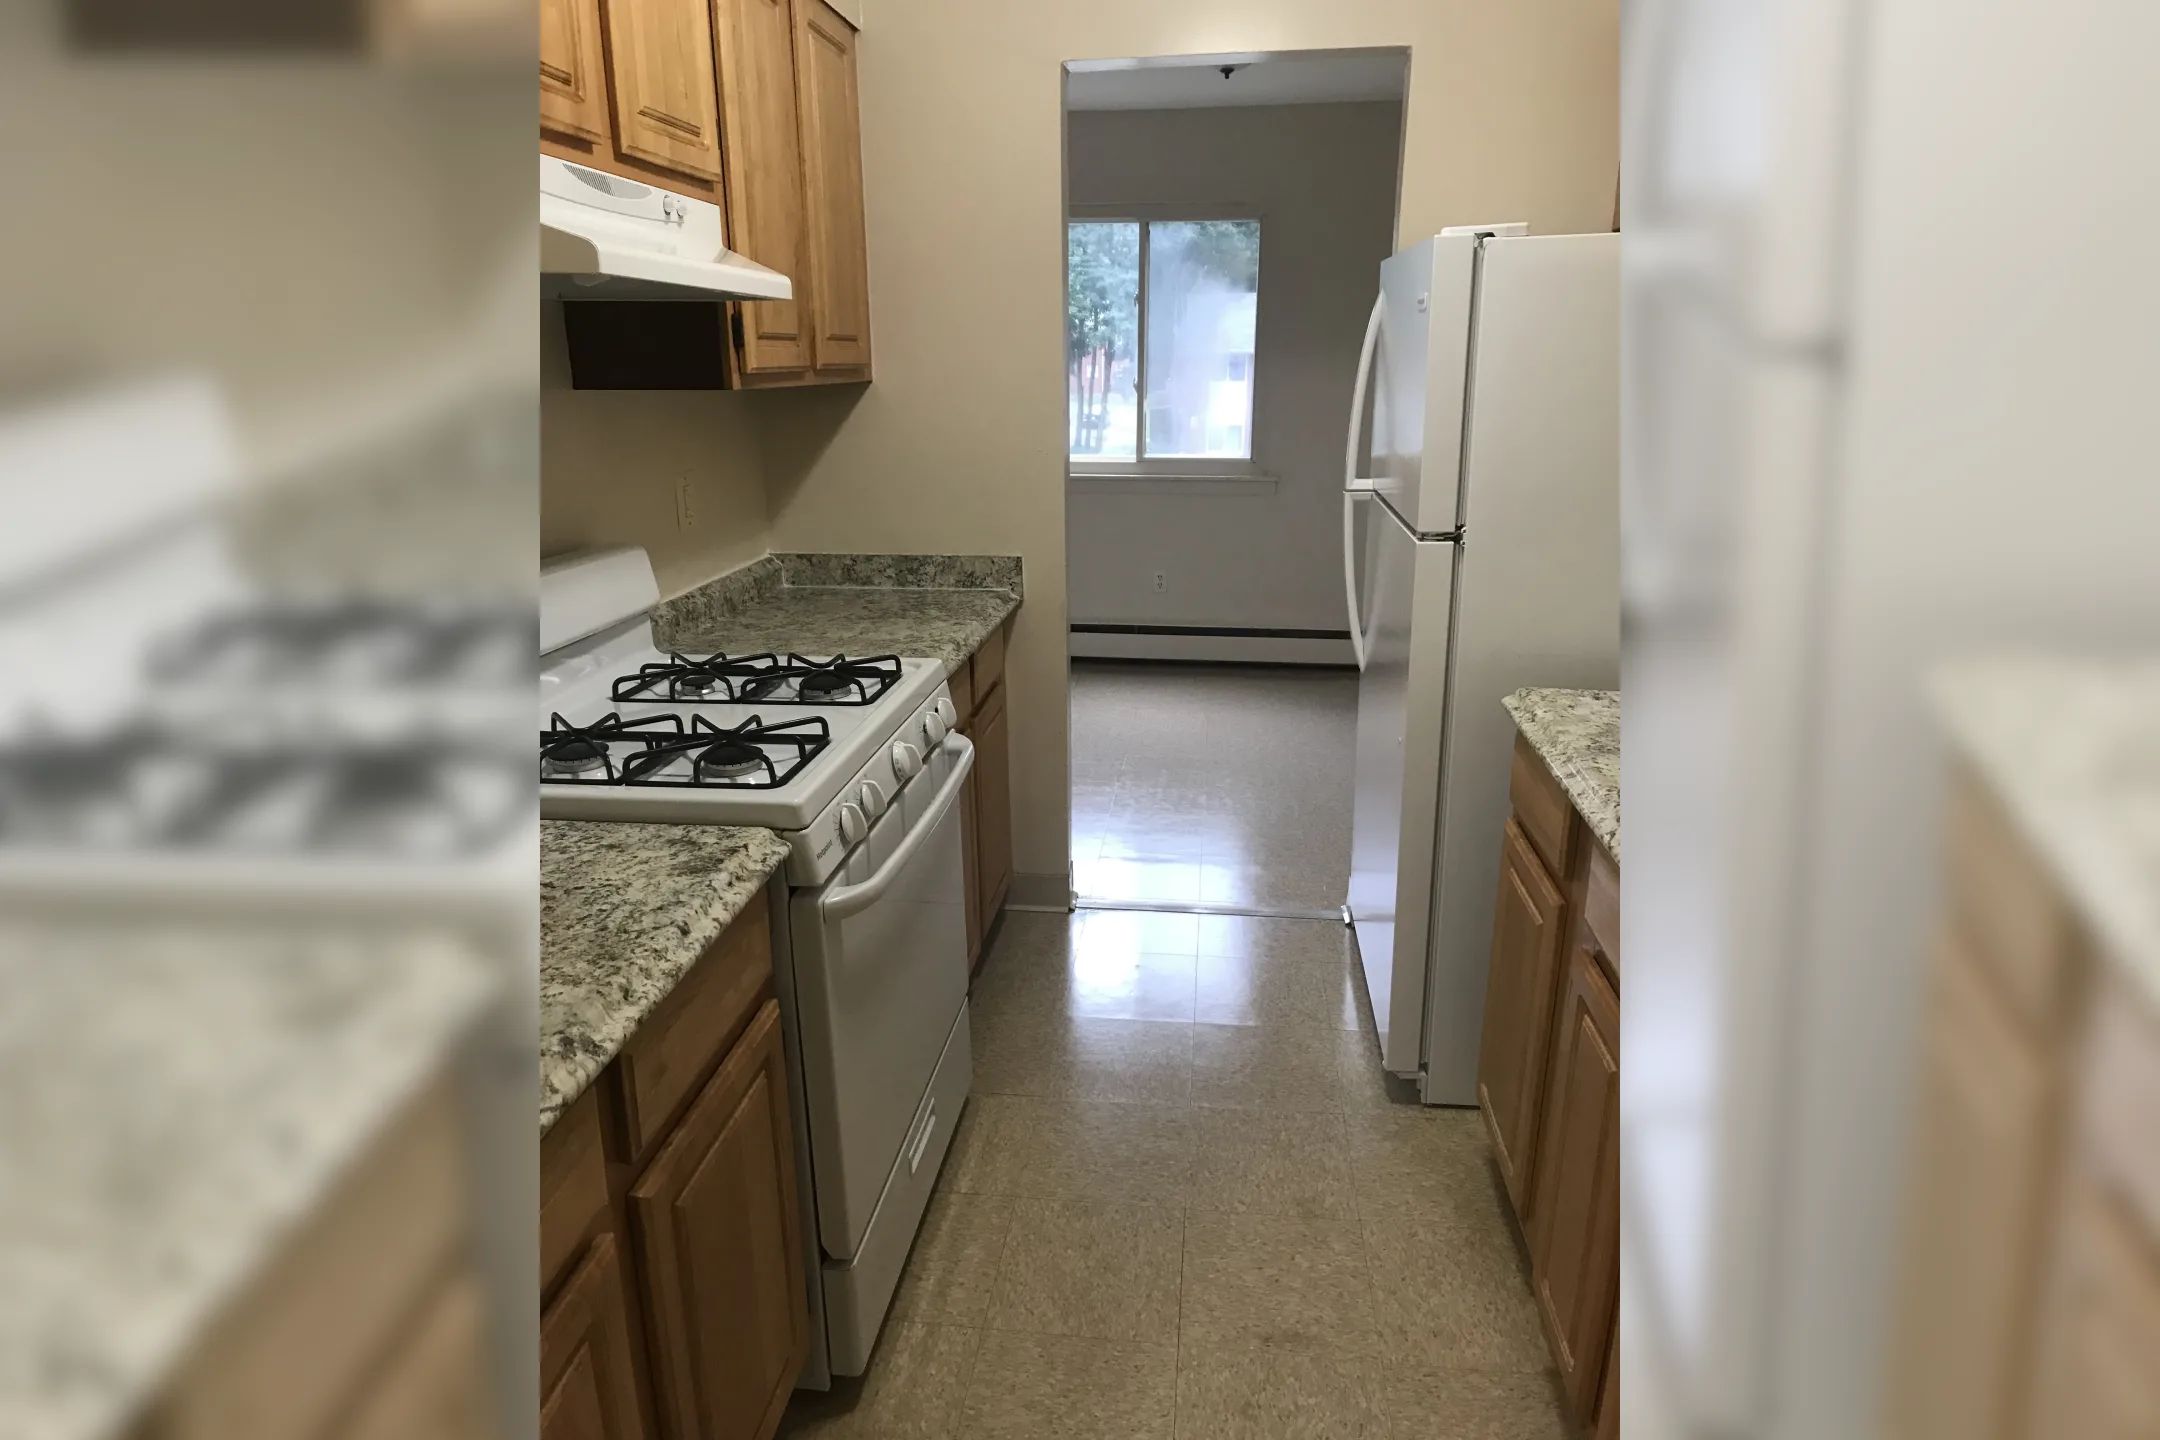 Kitchen - Piperbrook Apartments - West Hartford, CT